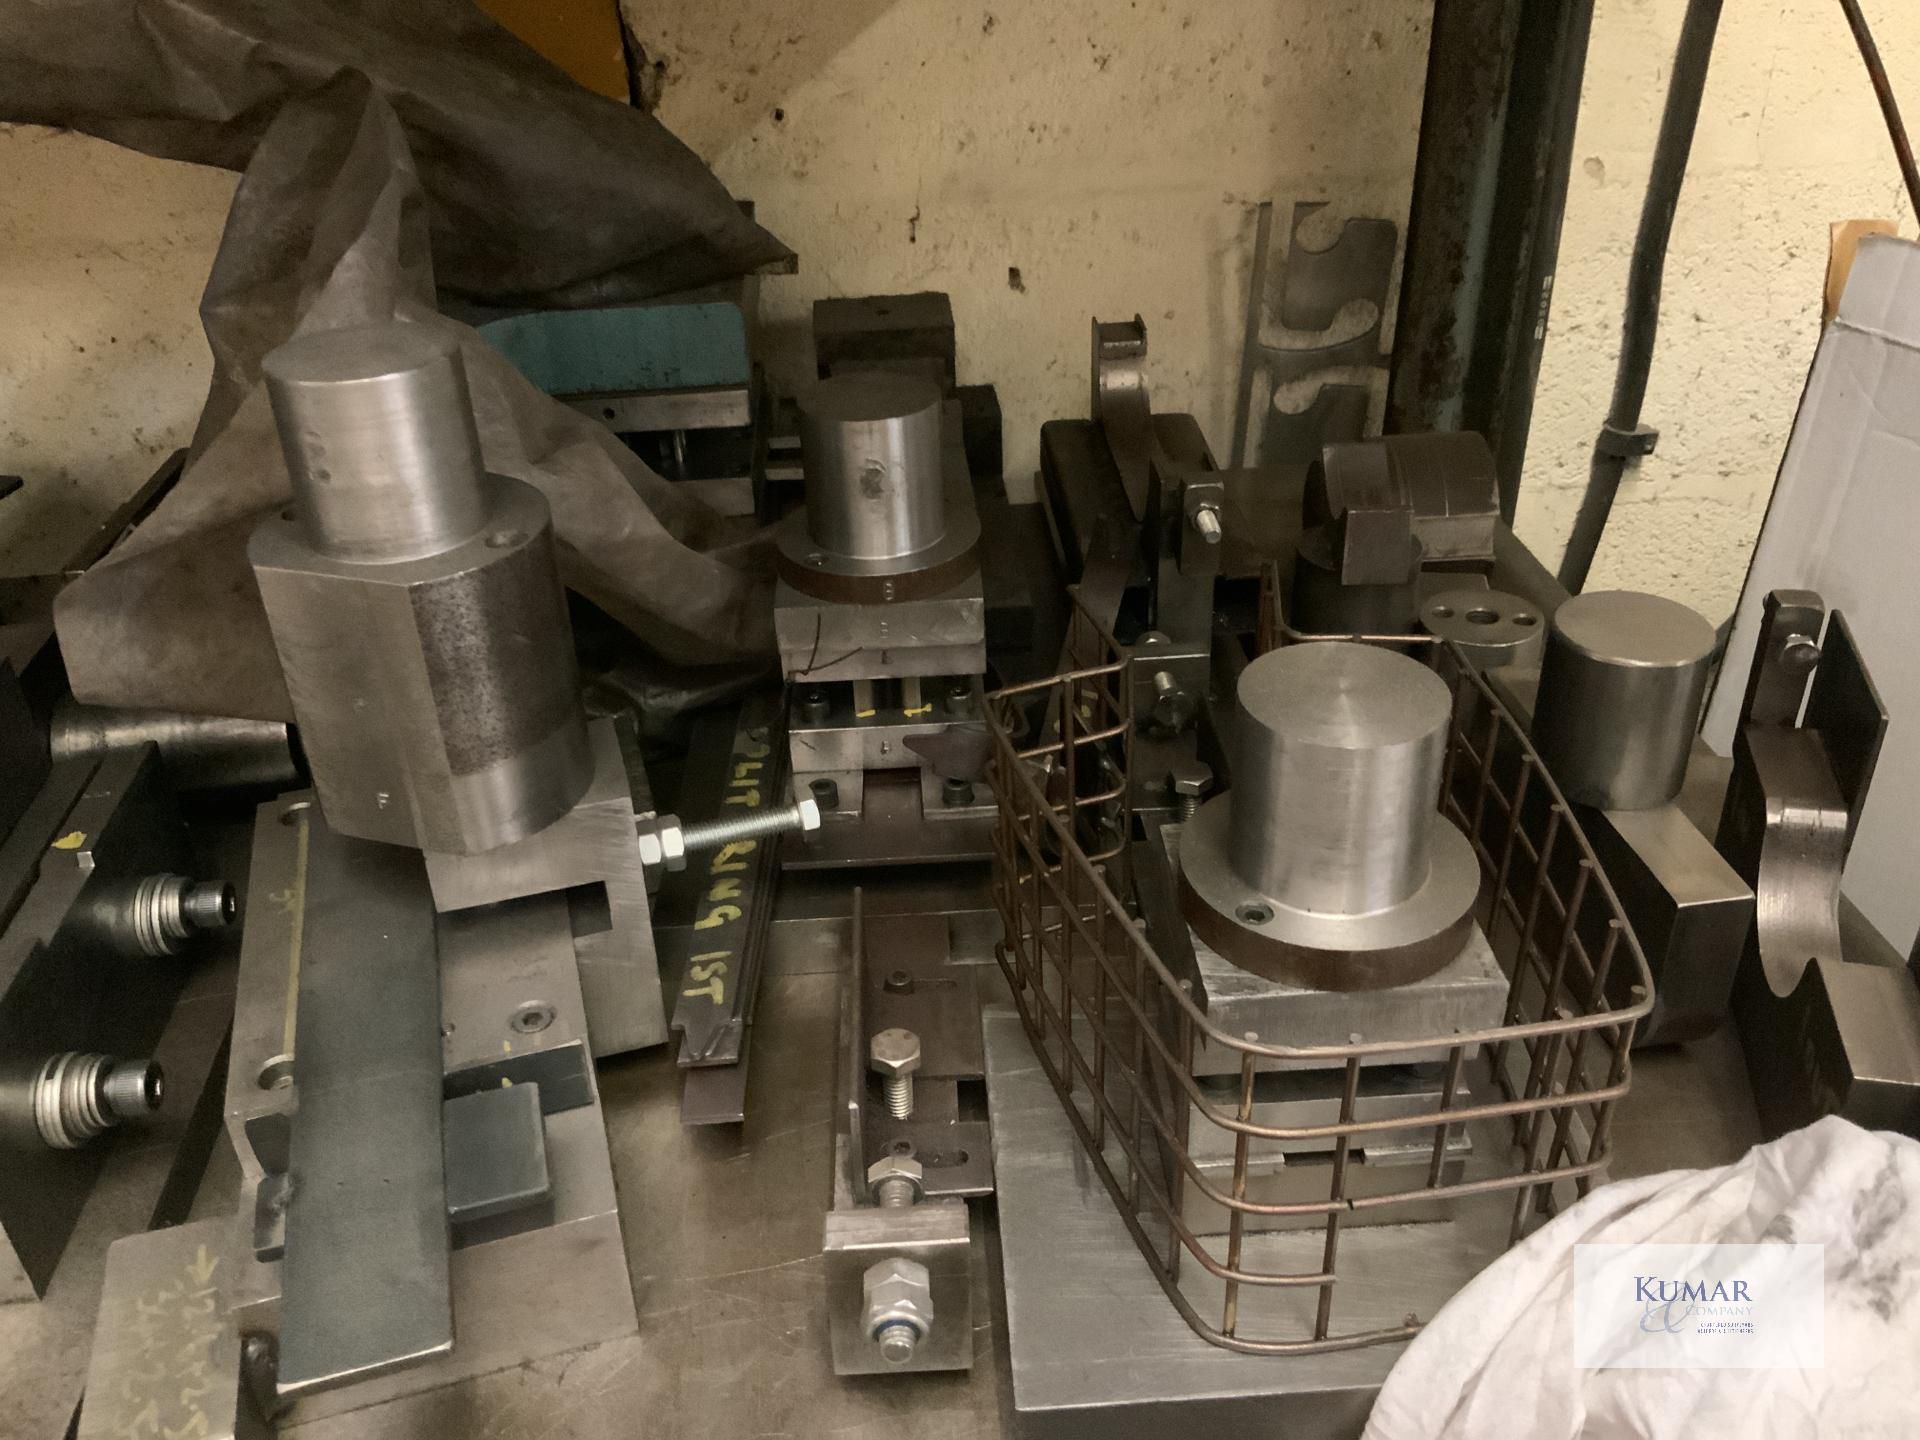 Machine tooling as imaged  Collection Day – Tuesday 27th February Unit 4 Goscote Industrial - Image 2 of 9